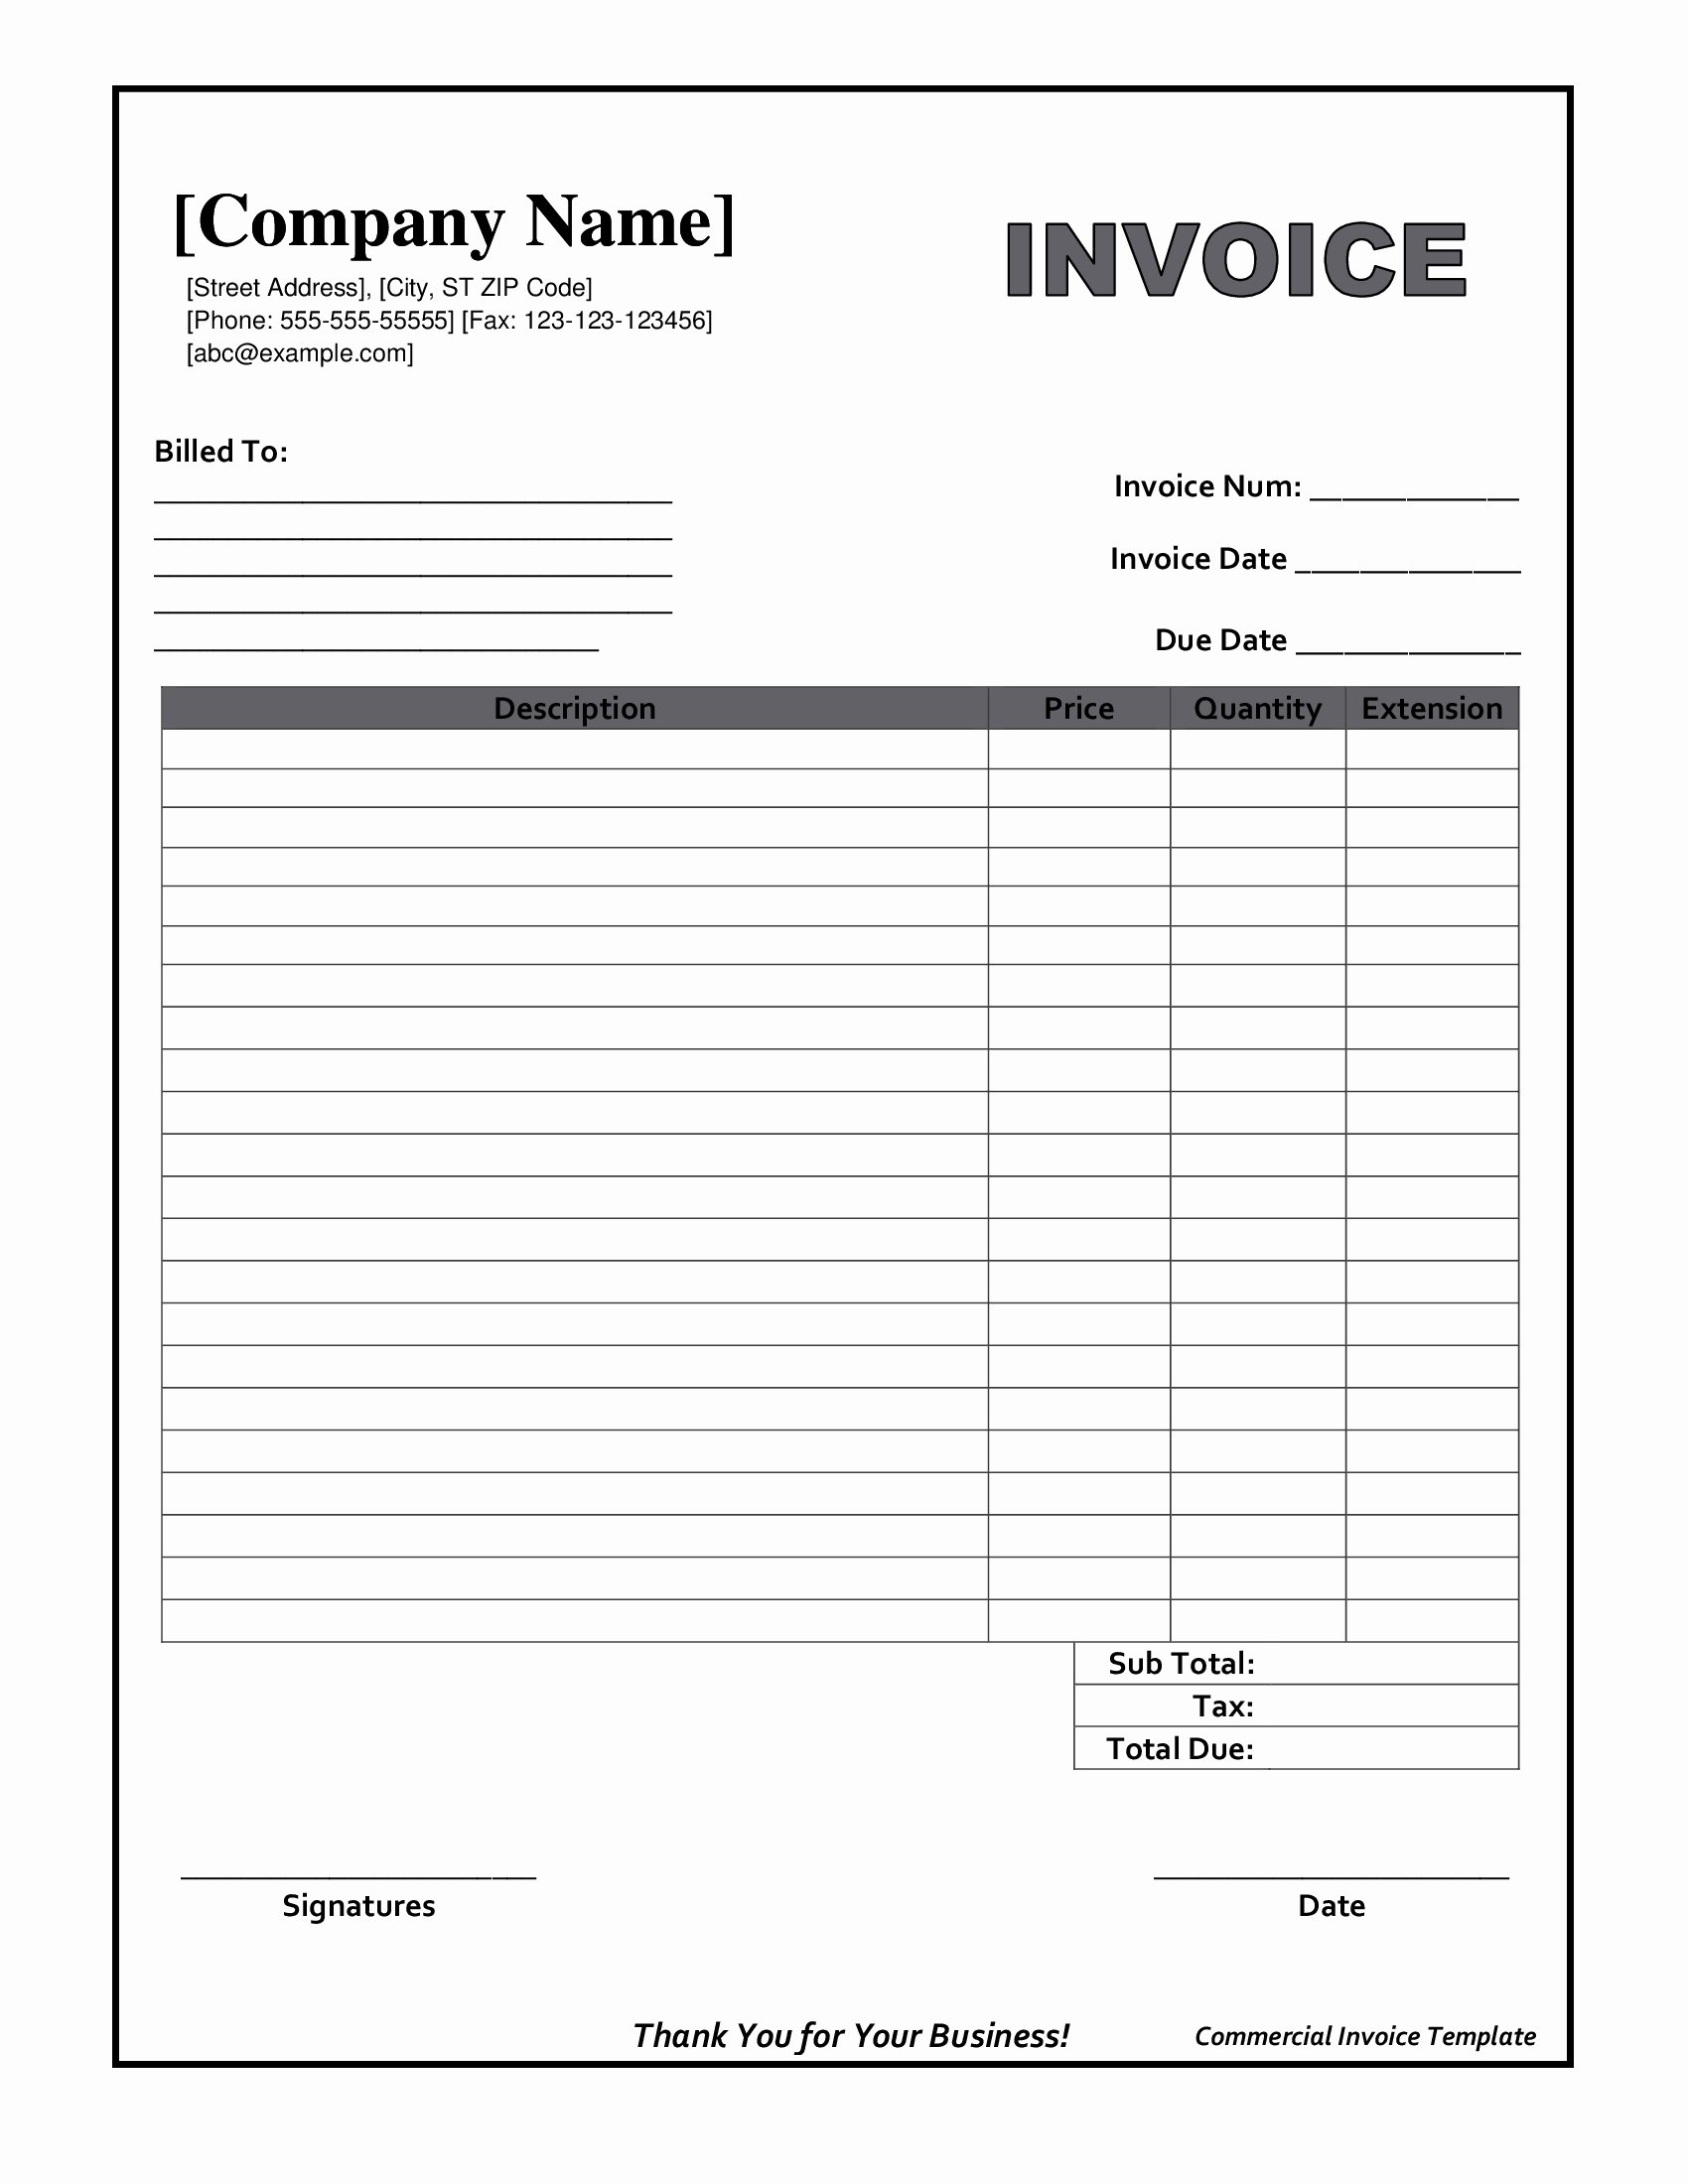 Blank Invoice Template Free Inspirational Blank Invoice form Free